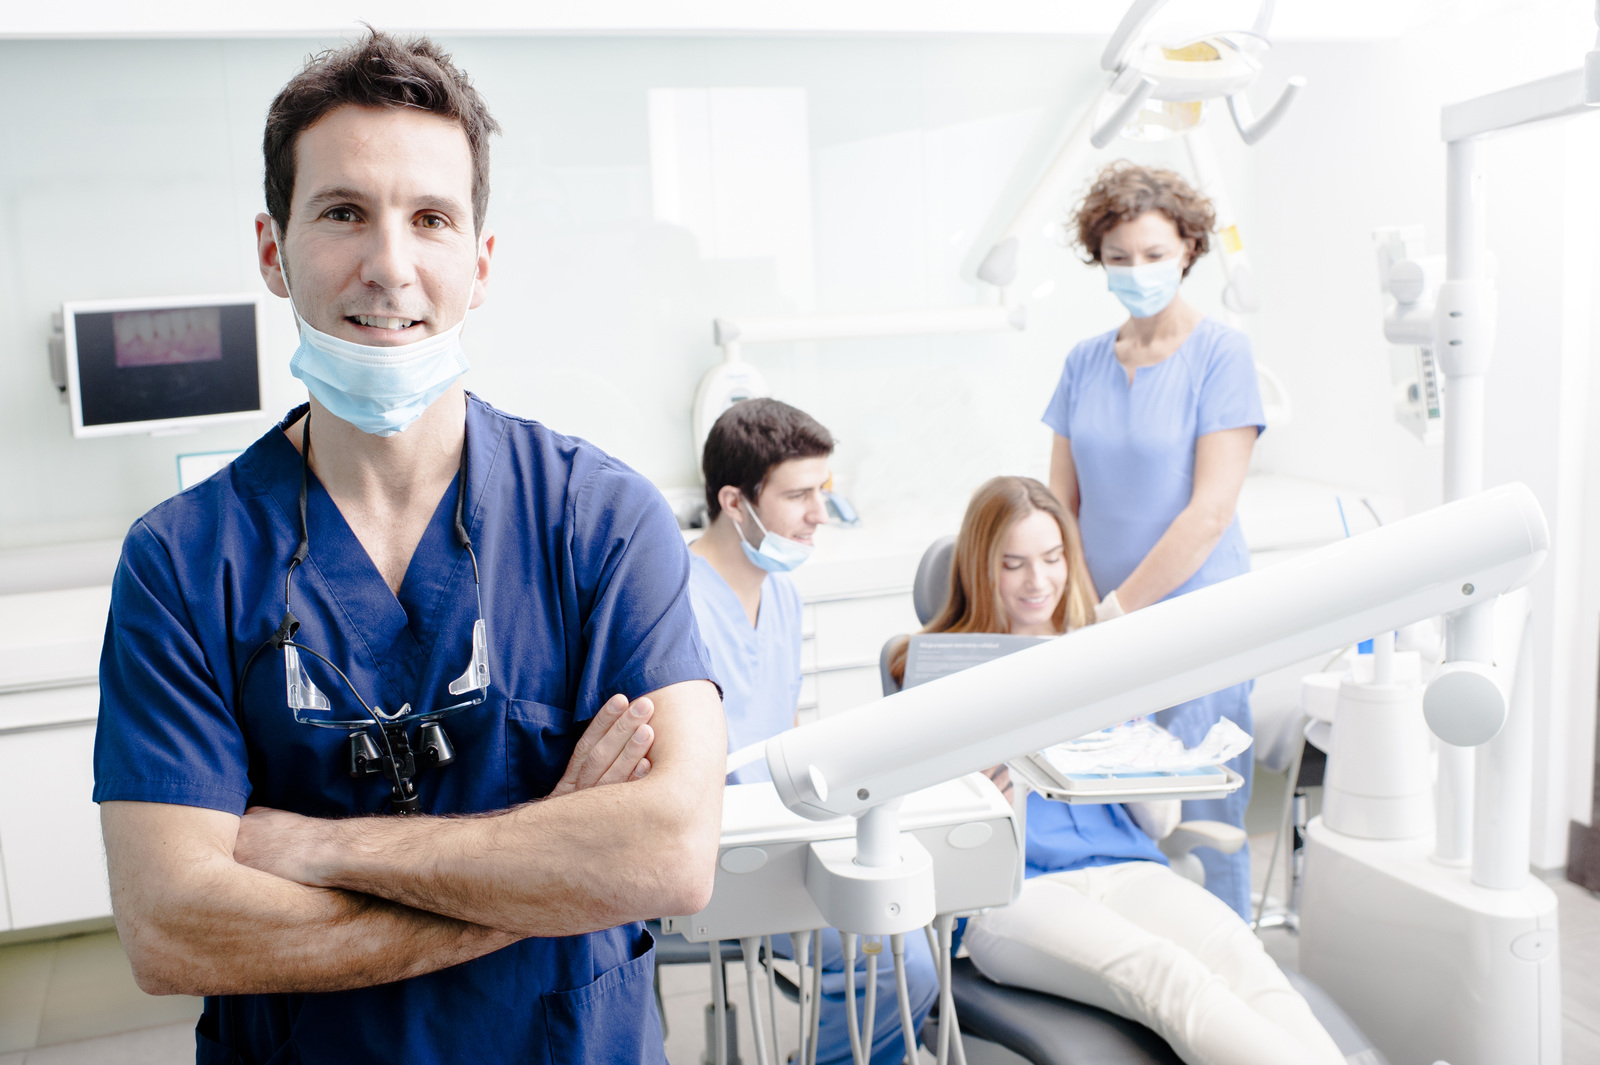 Private dentists are more motivated than NHS dentists - Dentistry.co.uk